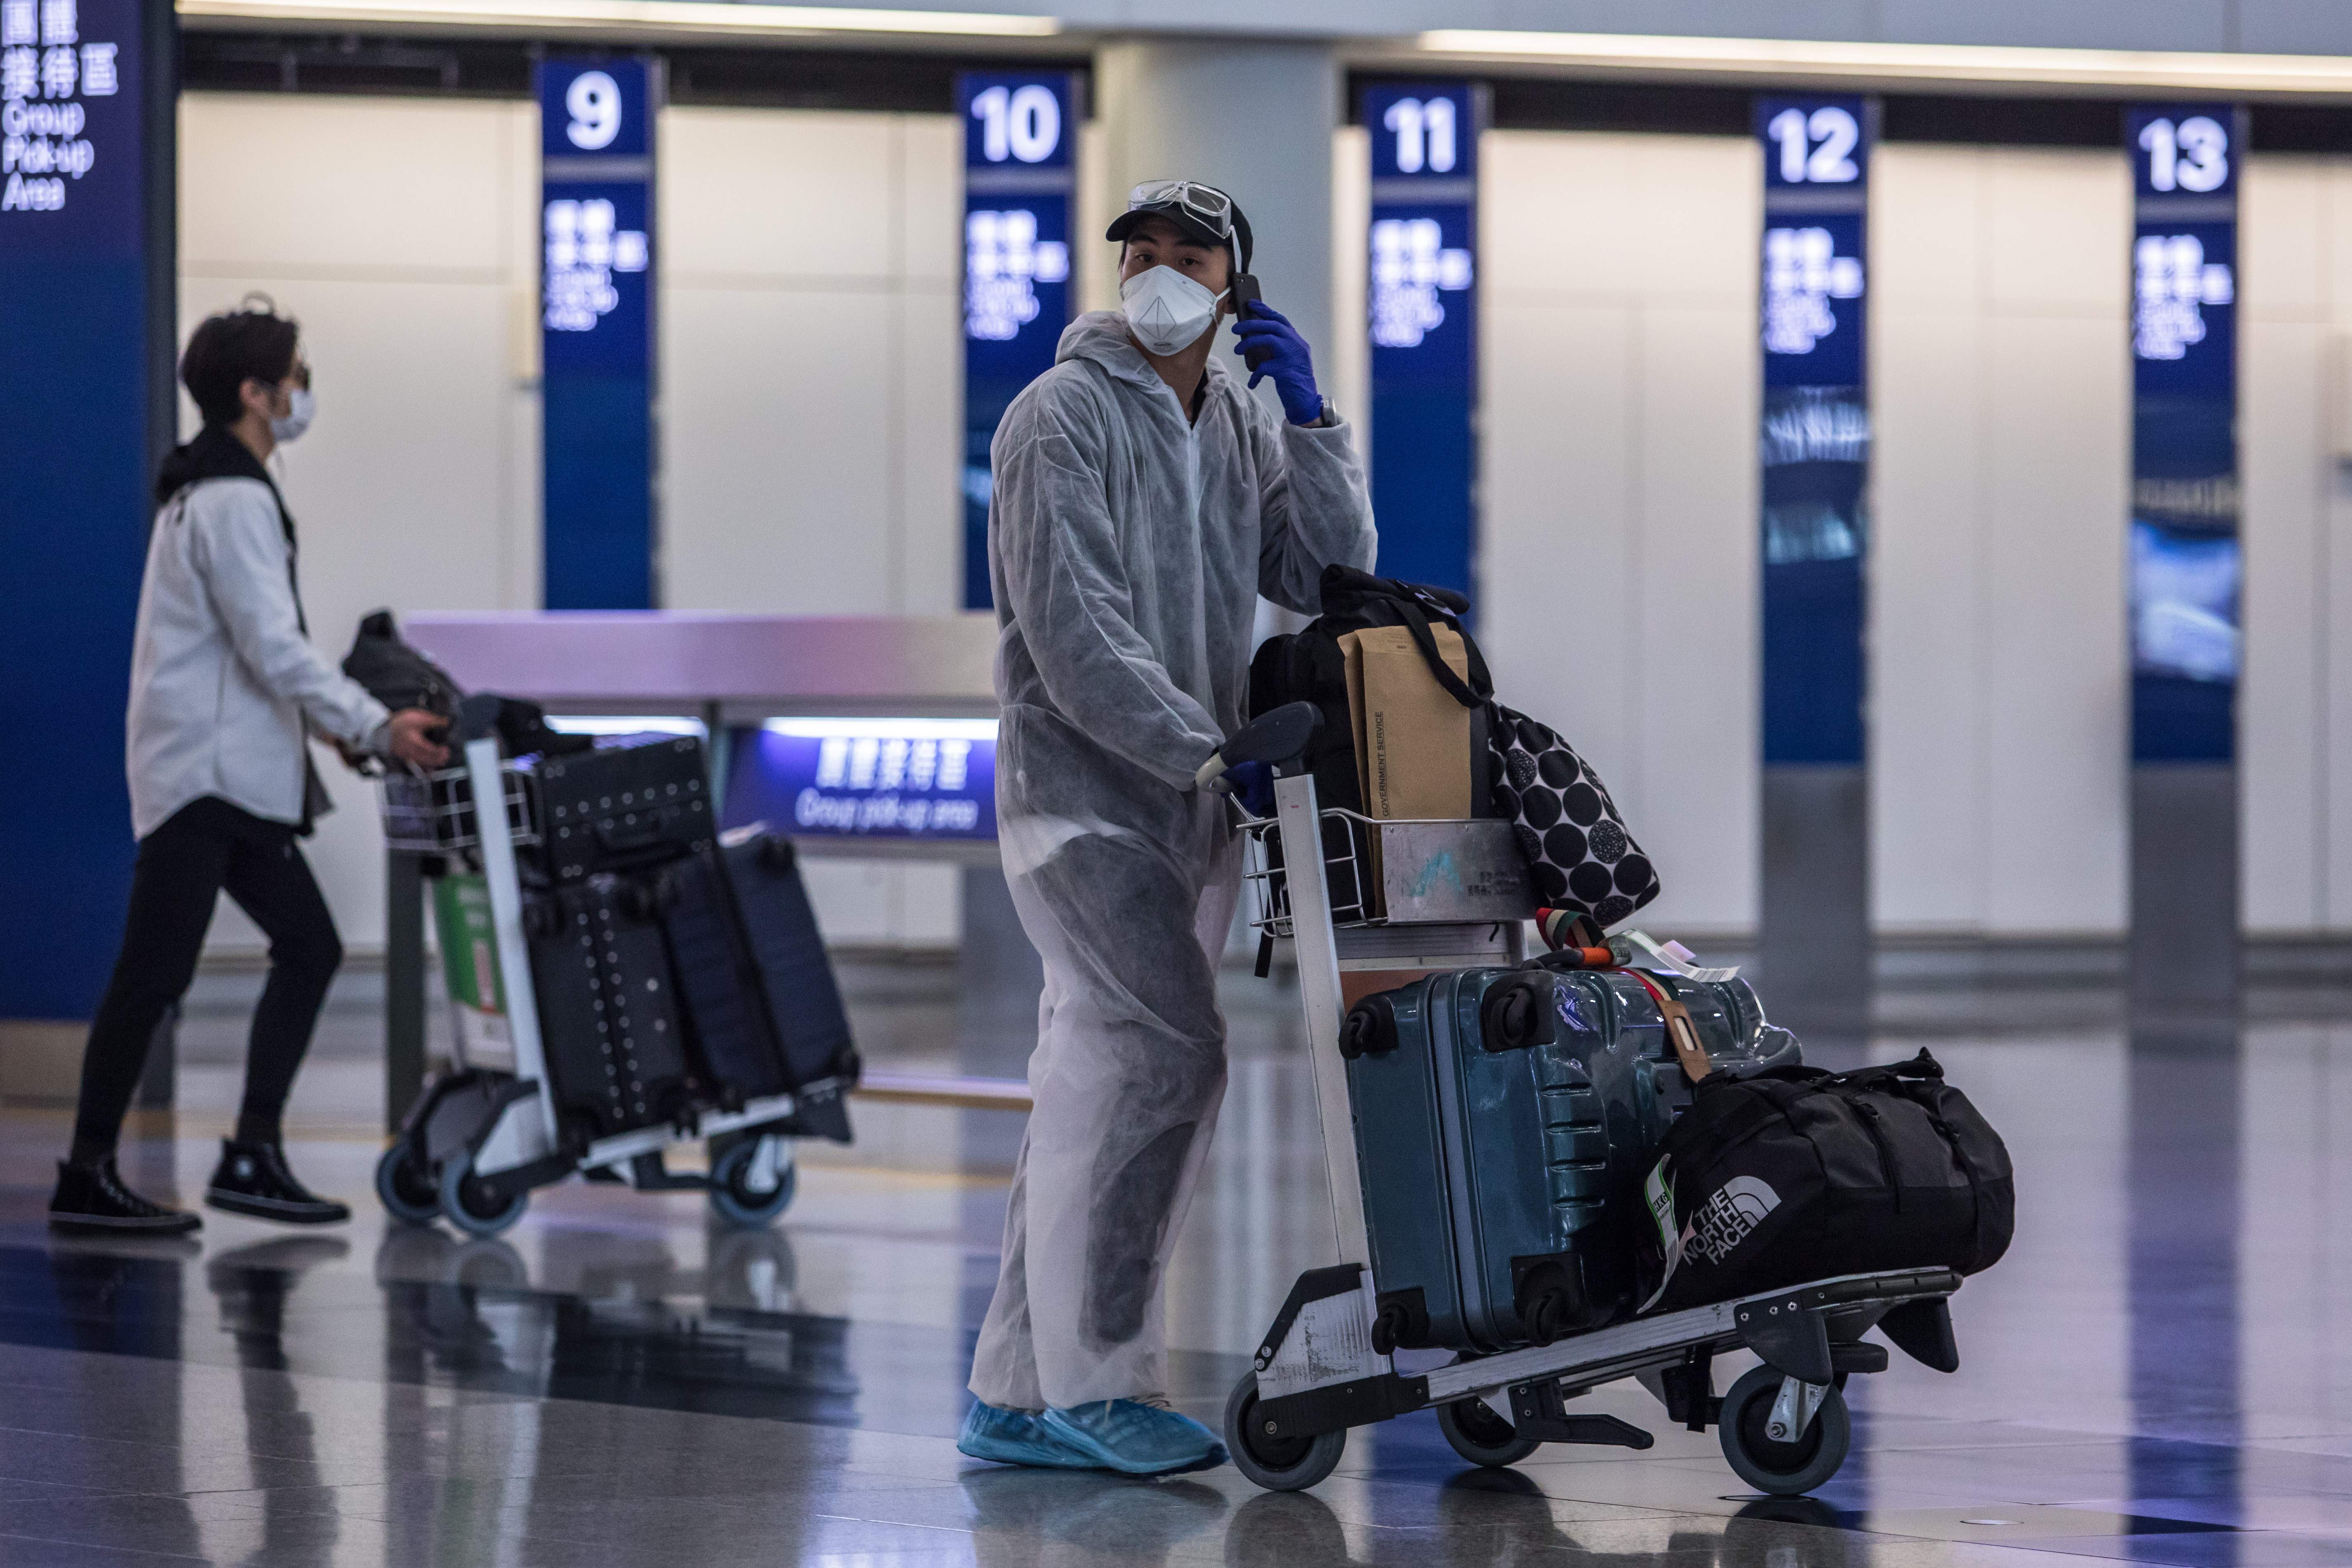 File: A passenger wearing a face mask and protective suit at the Hong Kong International Airport on 4 April, 2020